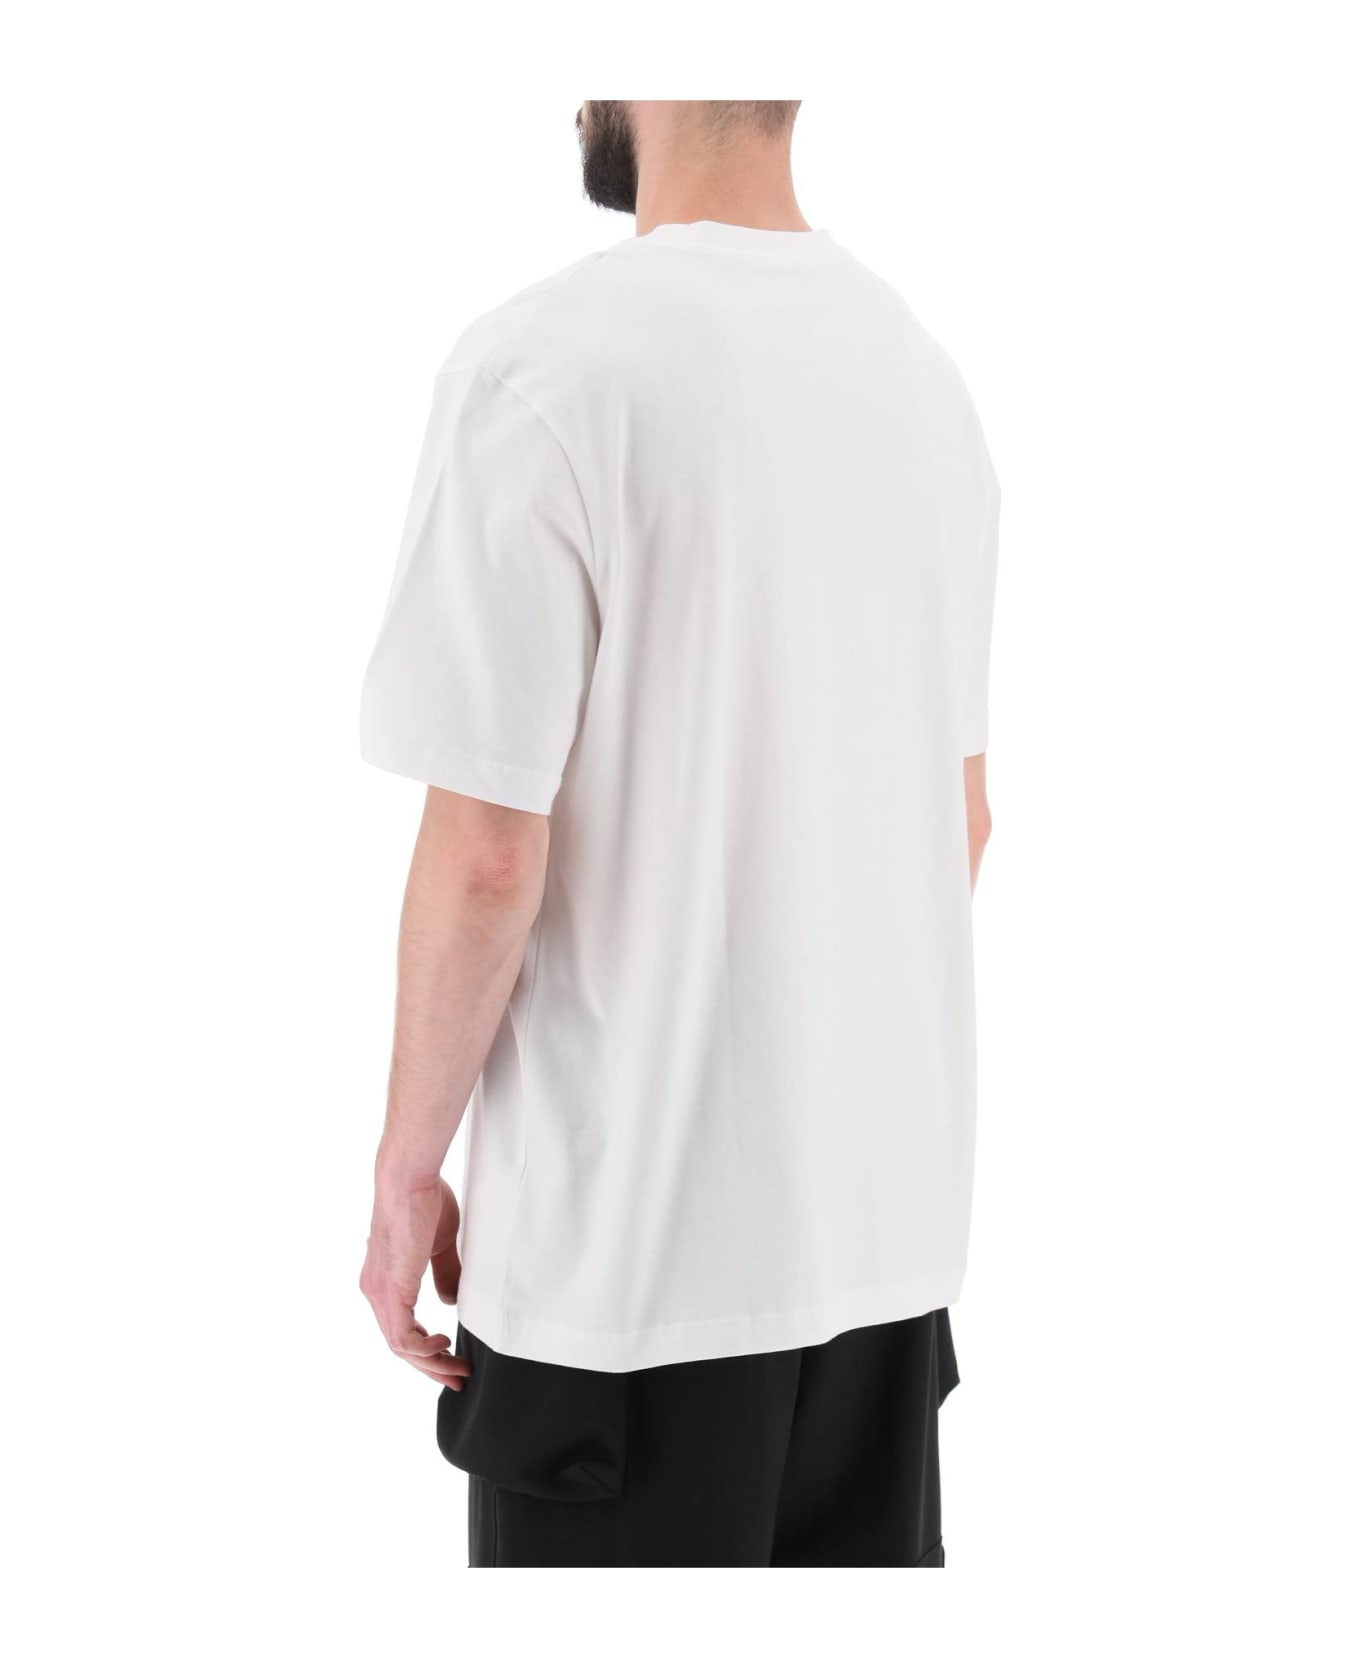 OAMC 'albrecht' T-shirt With Print - OFF WHITE (White)